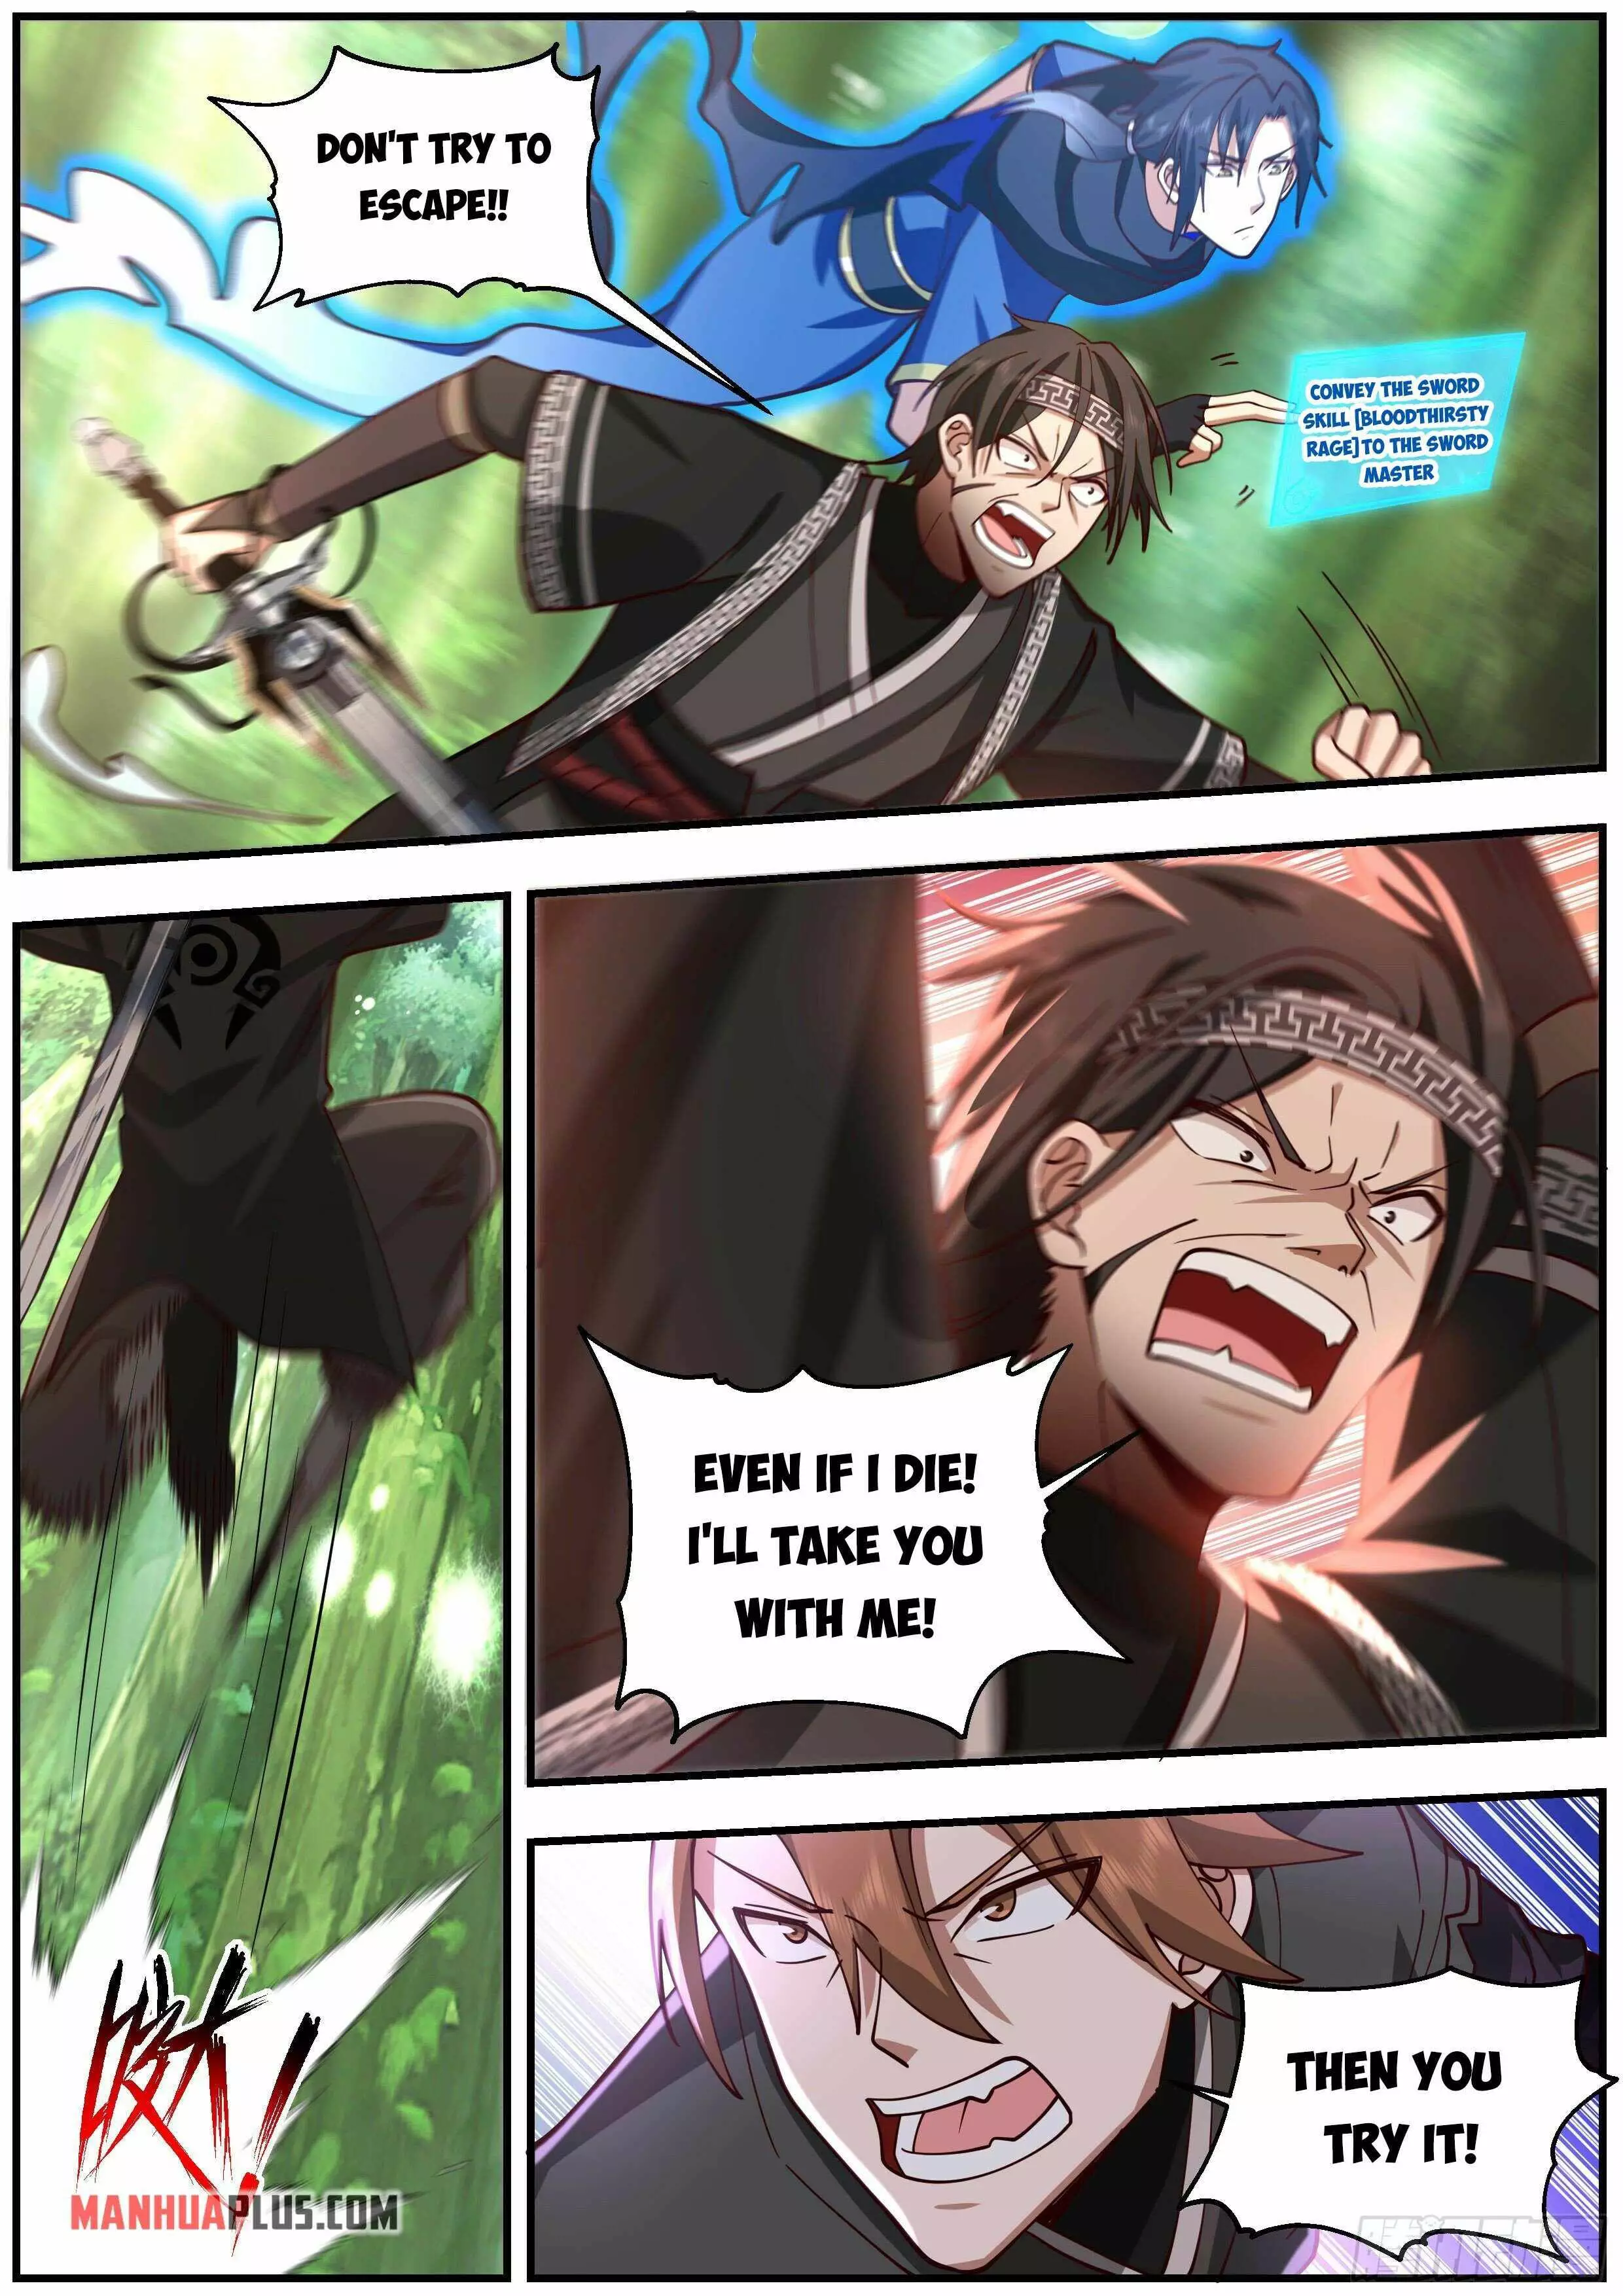 Killing Evolution From A Sword - 26 page 8-5f833eb5